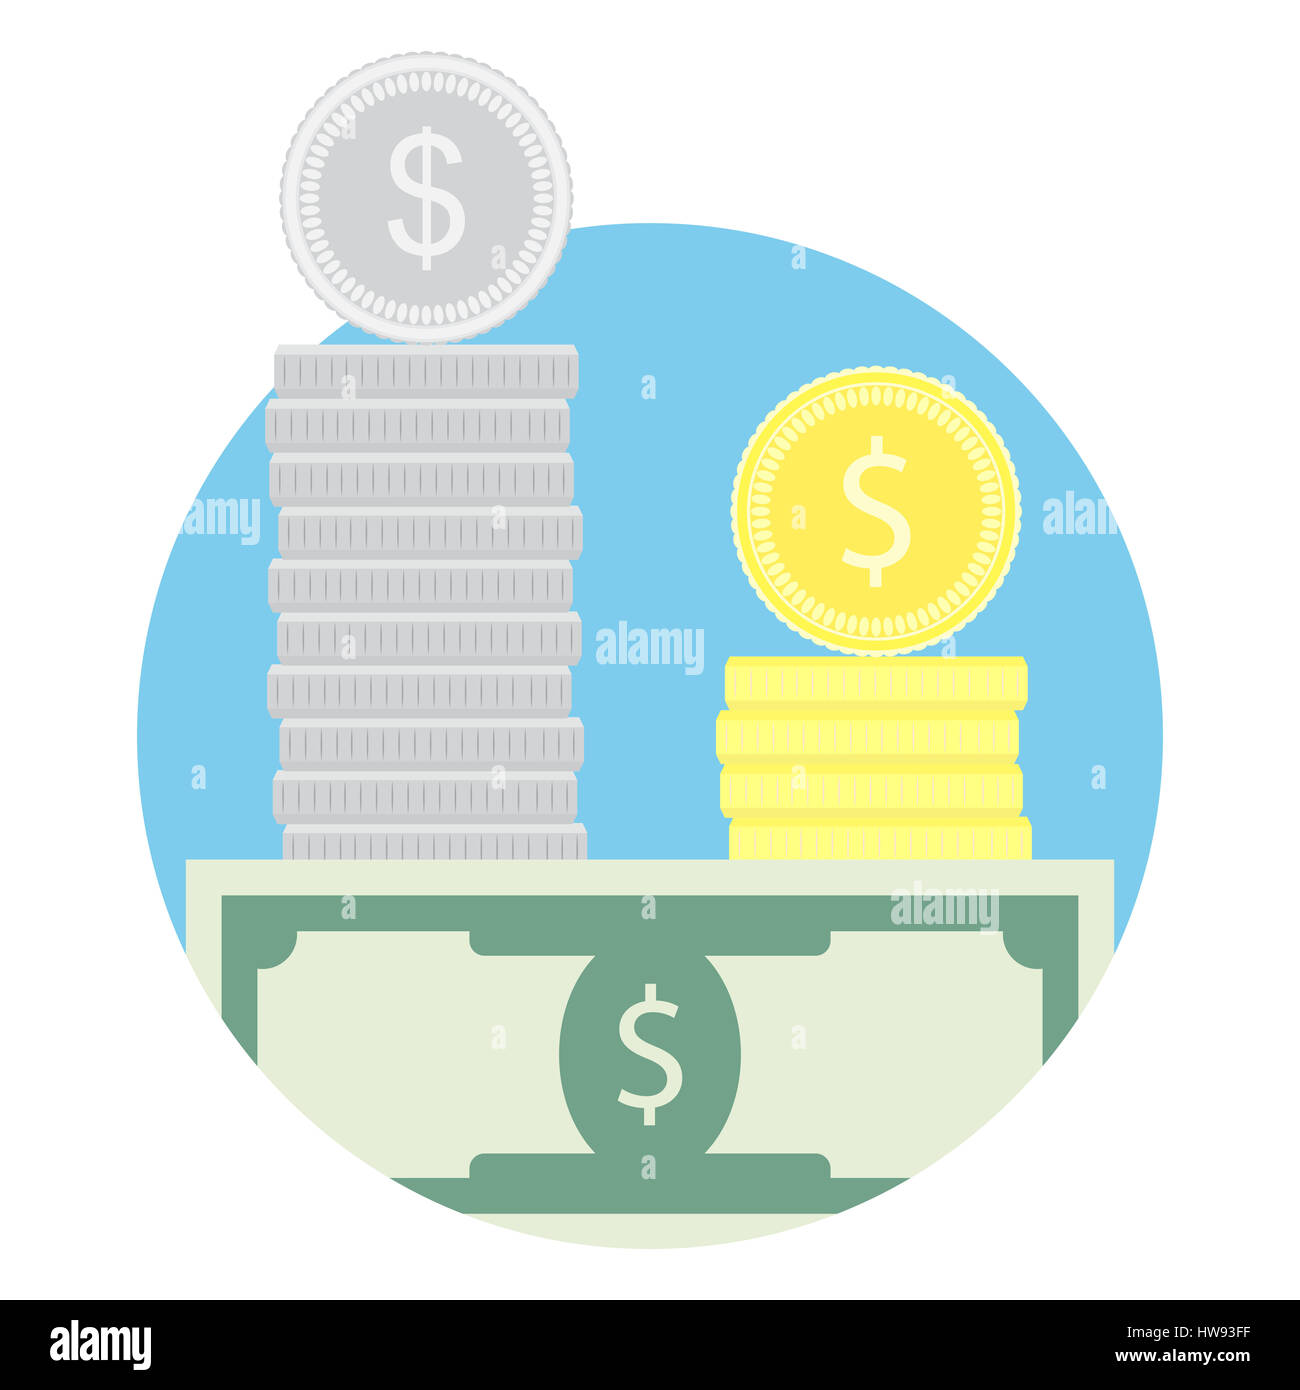 Salary vector icon. Tax financial, refinancing and revenue money illustration Stock Photo